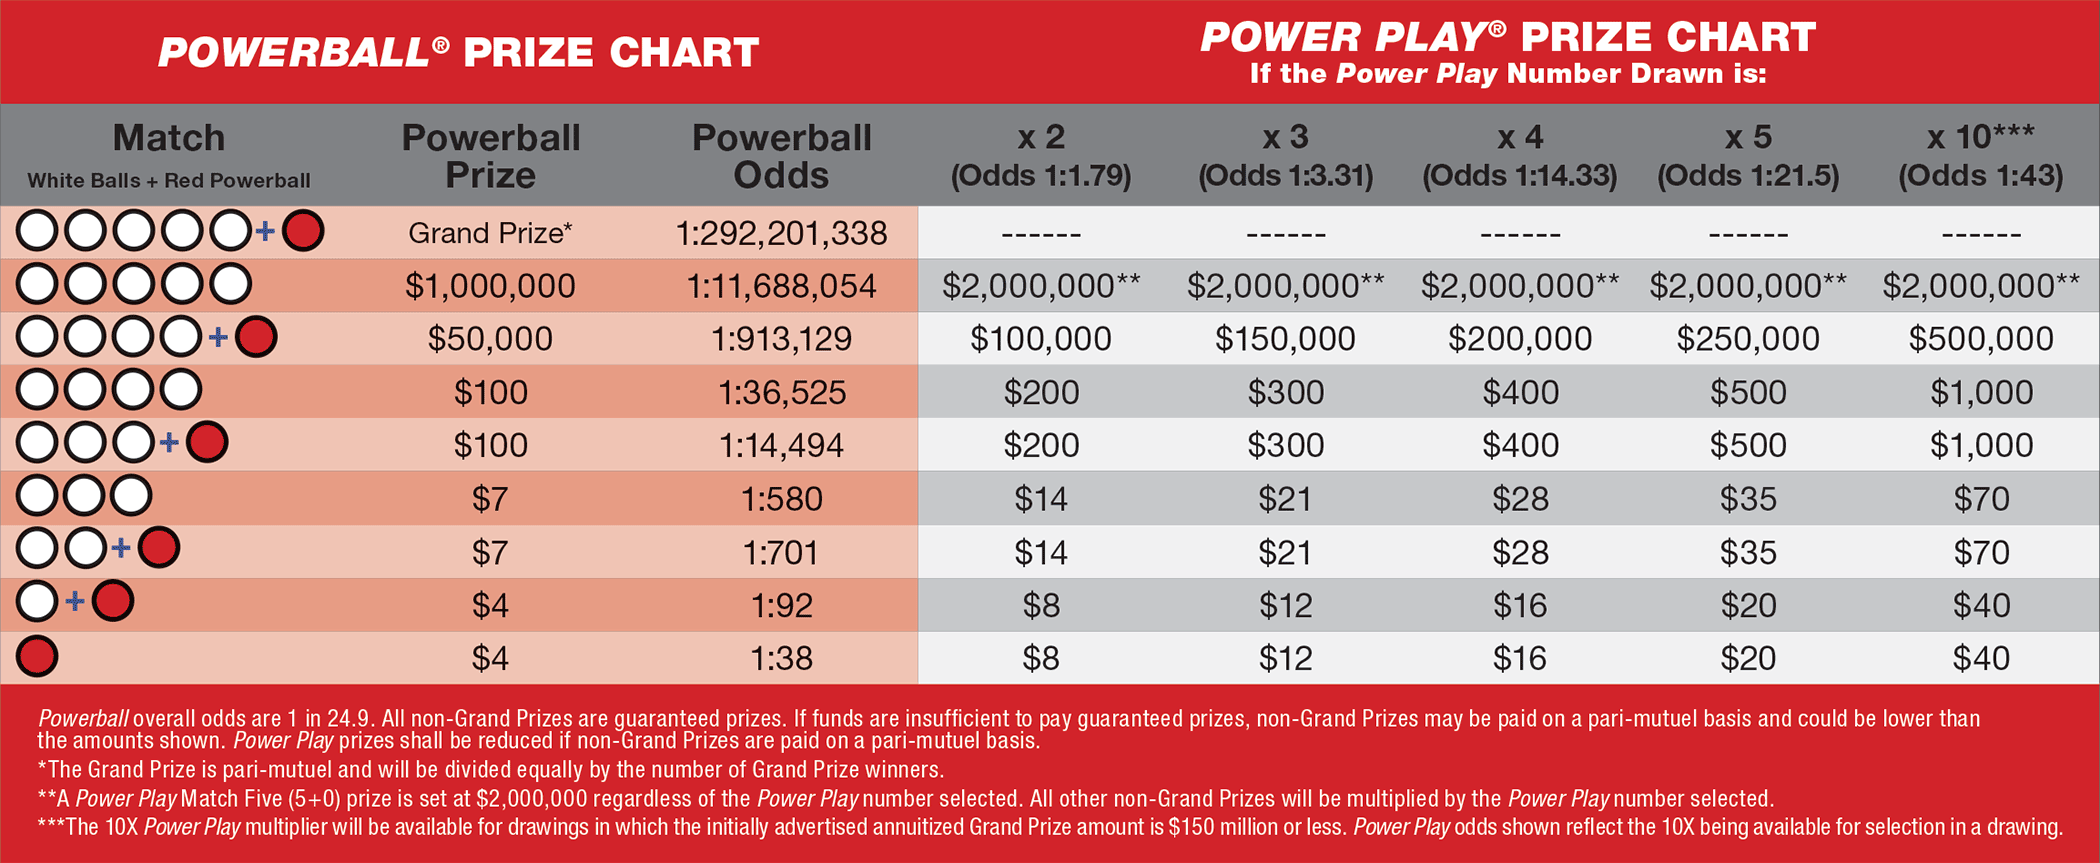 what are the payouts for the powerball